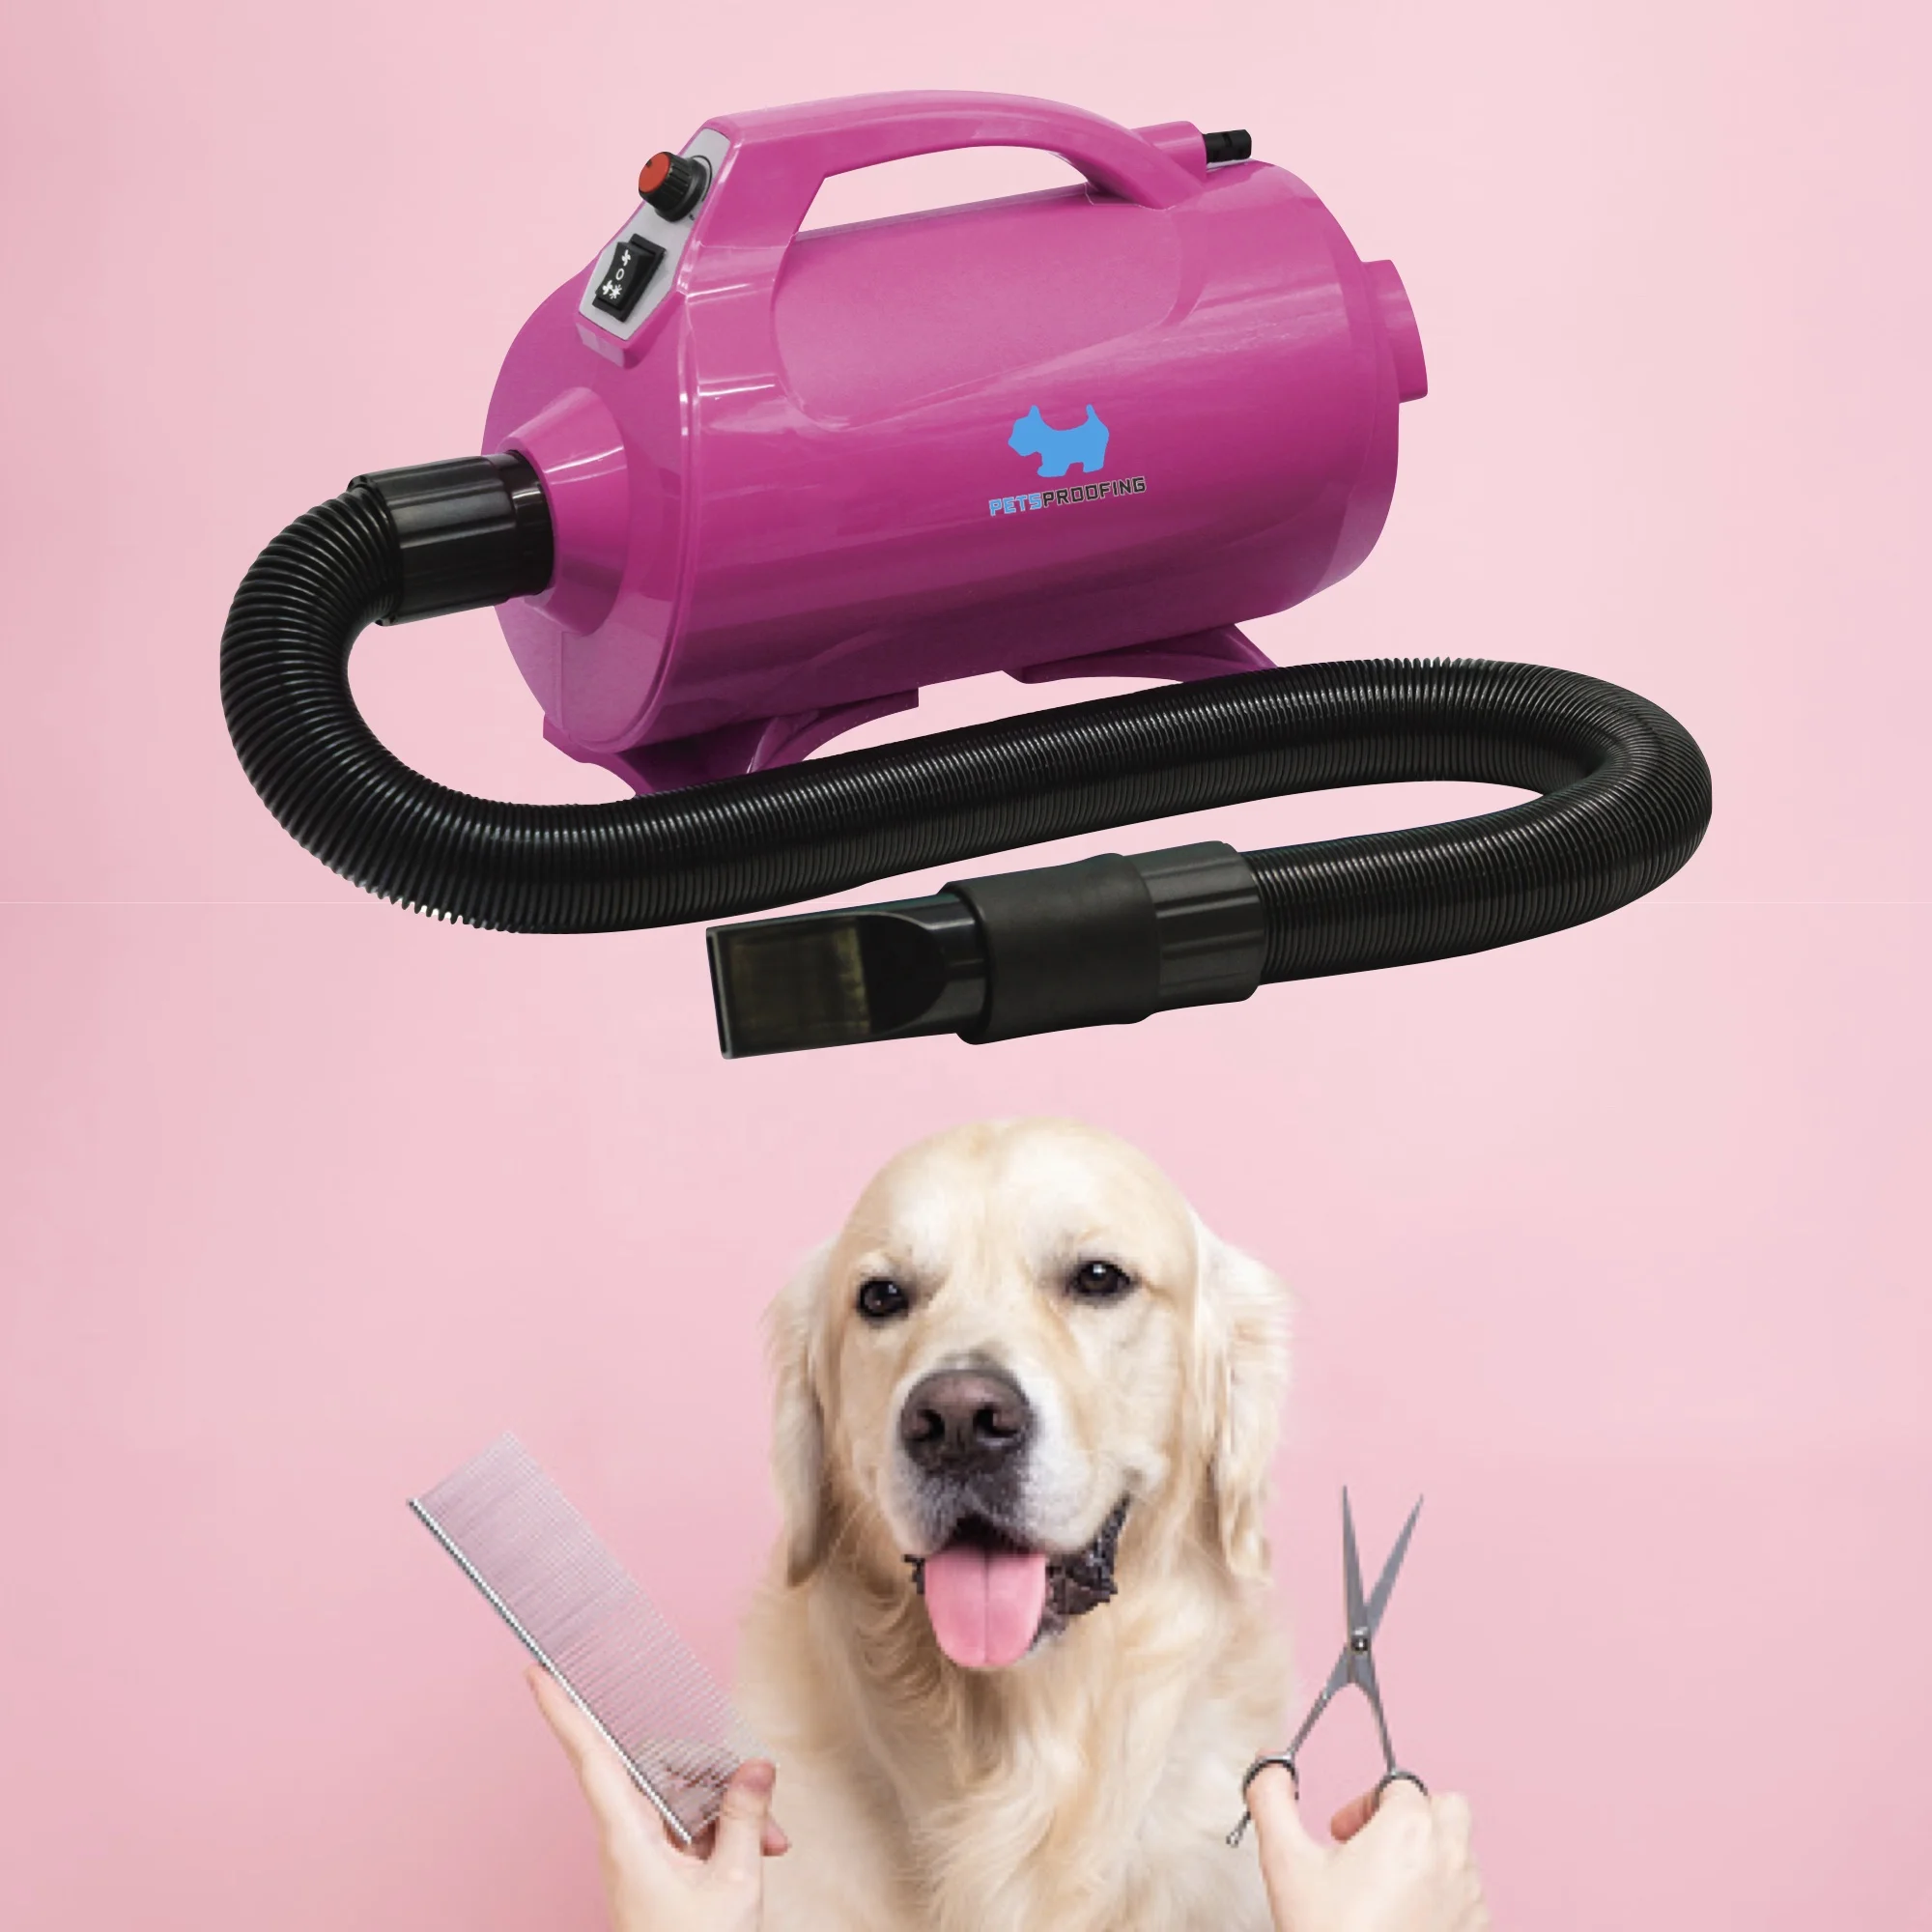 

Dog water high speed blower high power mute Dog hair dryers pet grooming dryer machine other pet products blower heater